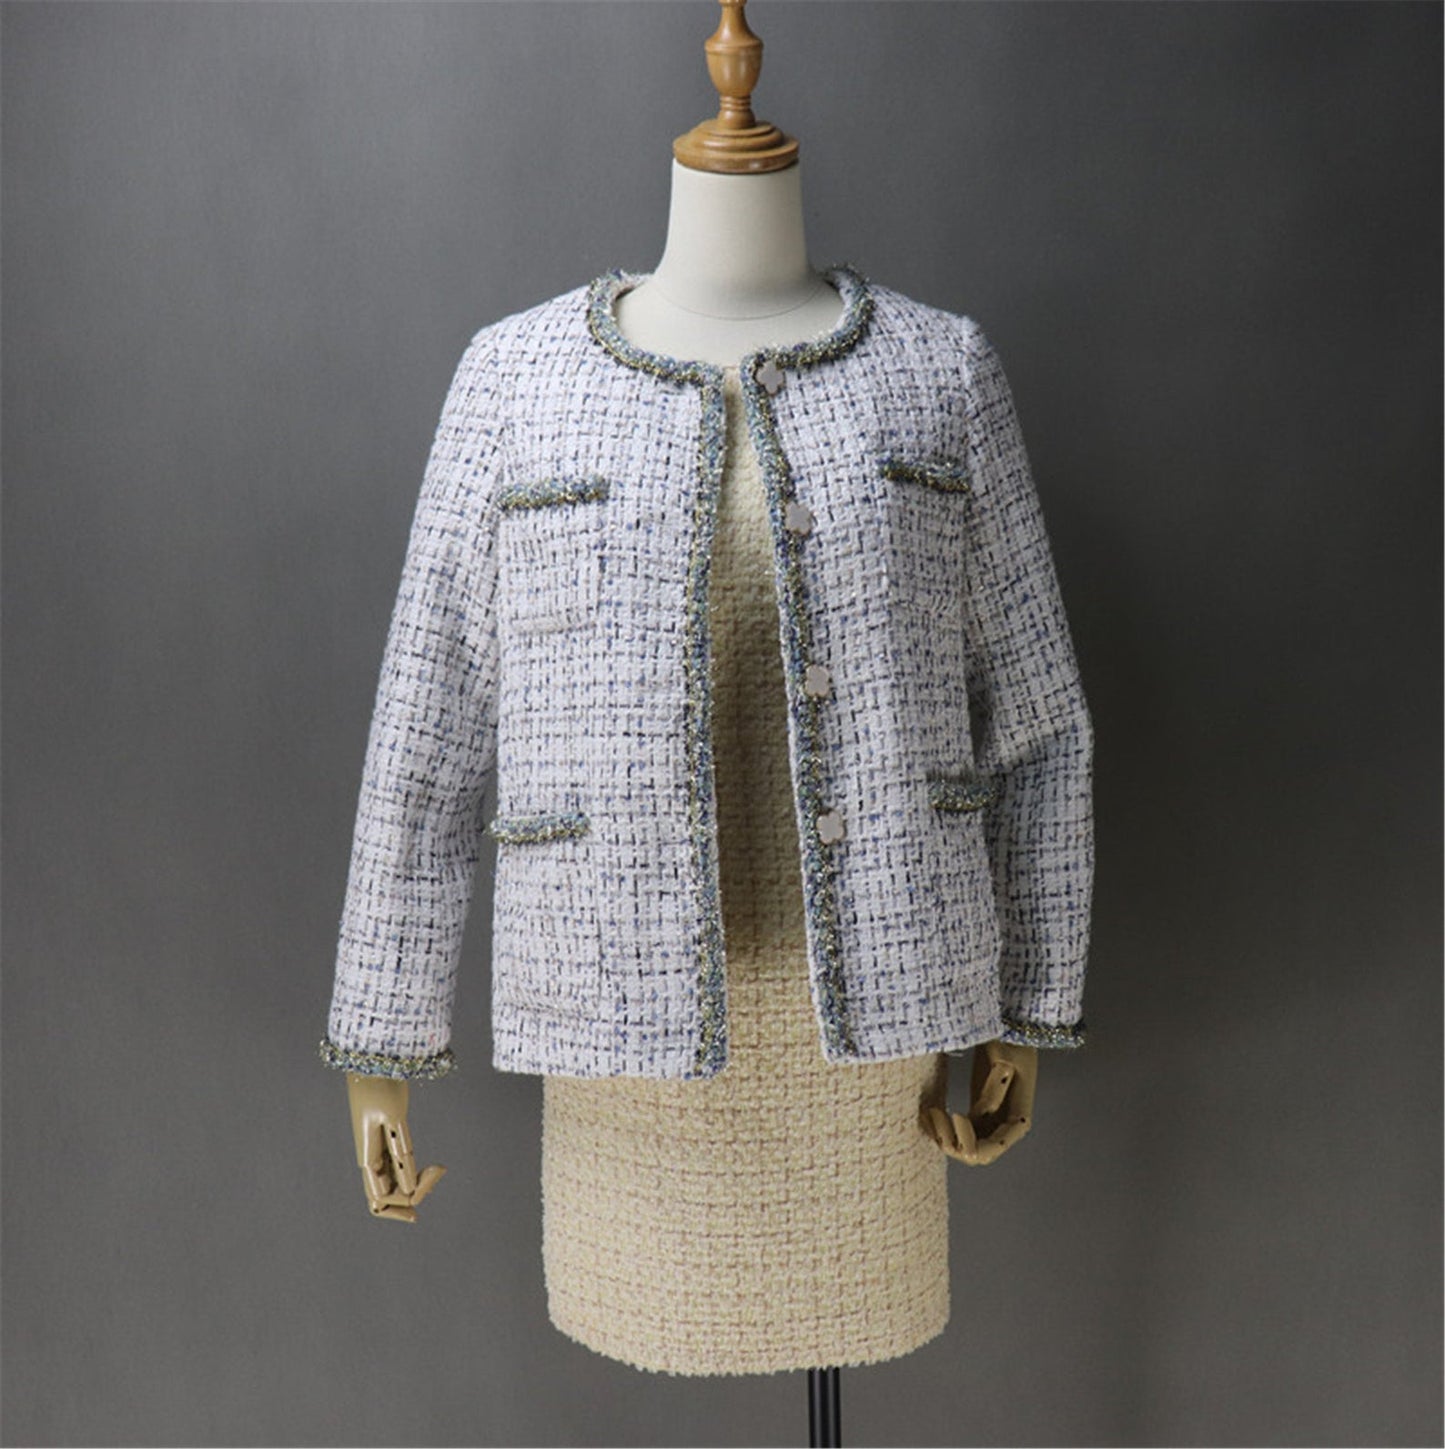 Women's  CUSTOM MADE Little Flower Button Tweed Jacket Coat Blazer *Customized Size*  UK CUSTOMER SERVICE! Women's  CUSTOM MADE Little Flower Button Tweed Jacket Coat Blazer, can worn for party, ceremony and inauguration All items are made to order. Please advise your height, weight and body measurements ( Bust, shoulder, Sleeves, Waist and Length etc). Our tailors will make the order for you!  Materials: Wool blend